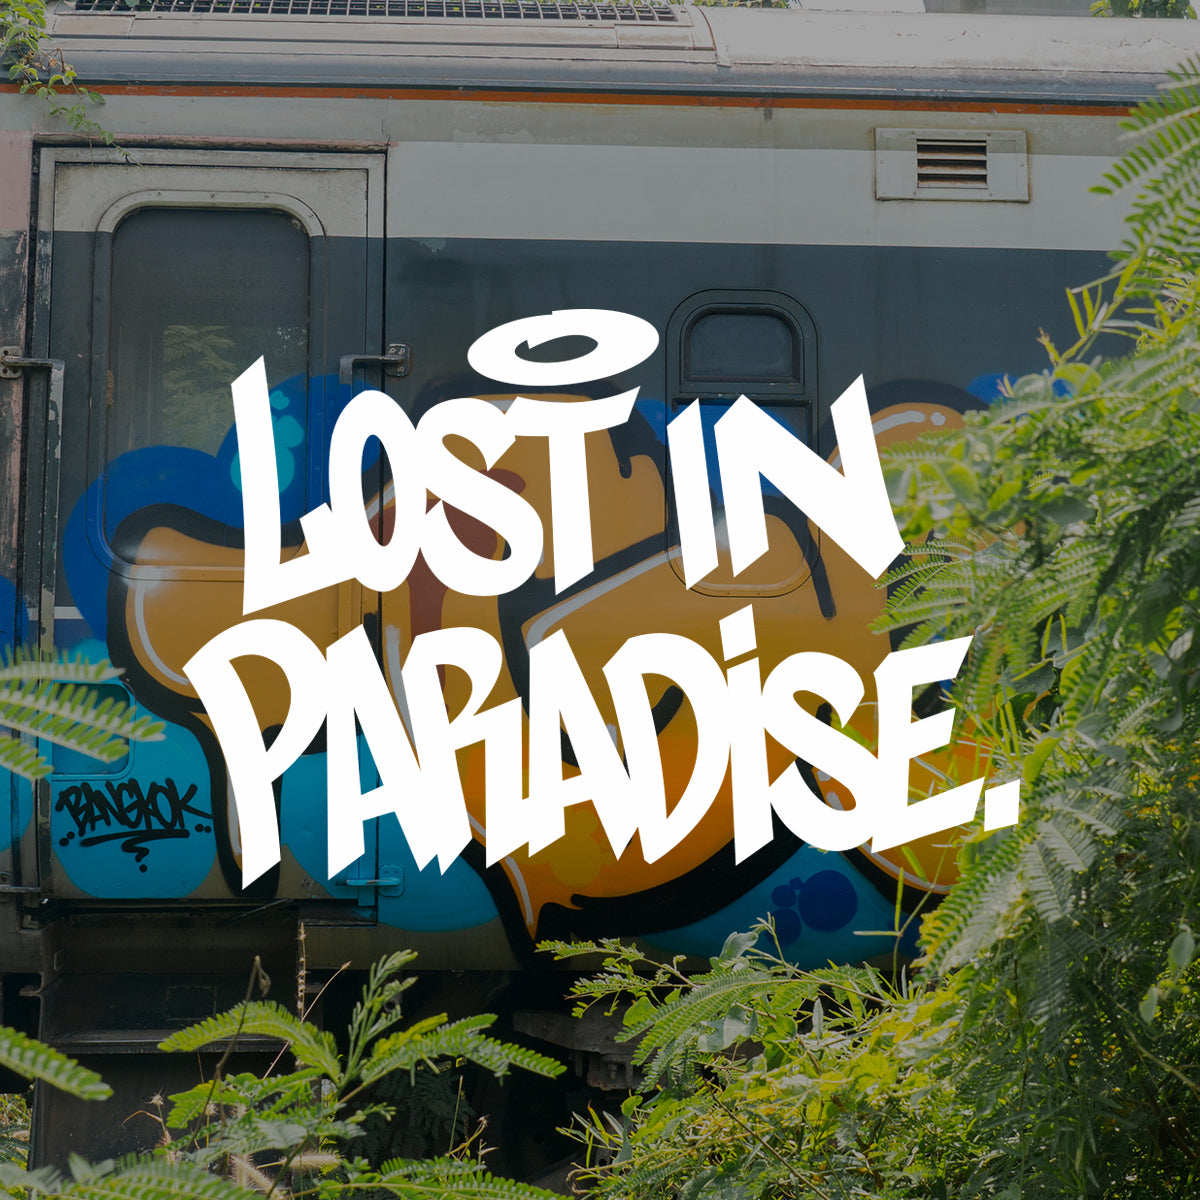 VIDEO - Lost In Paradise..